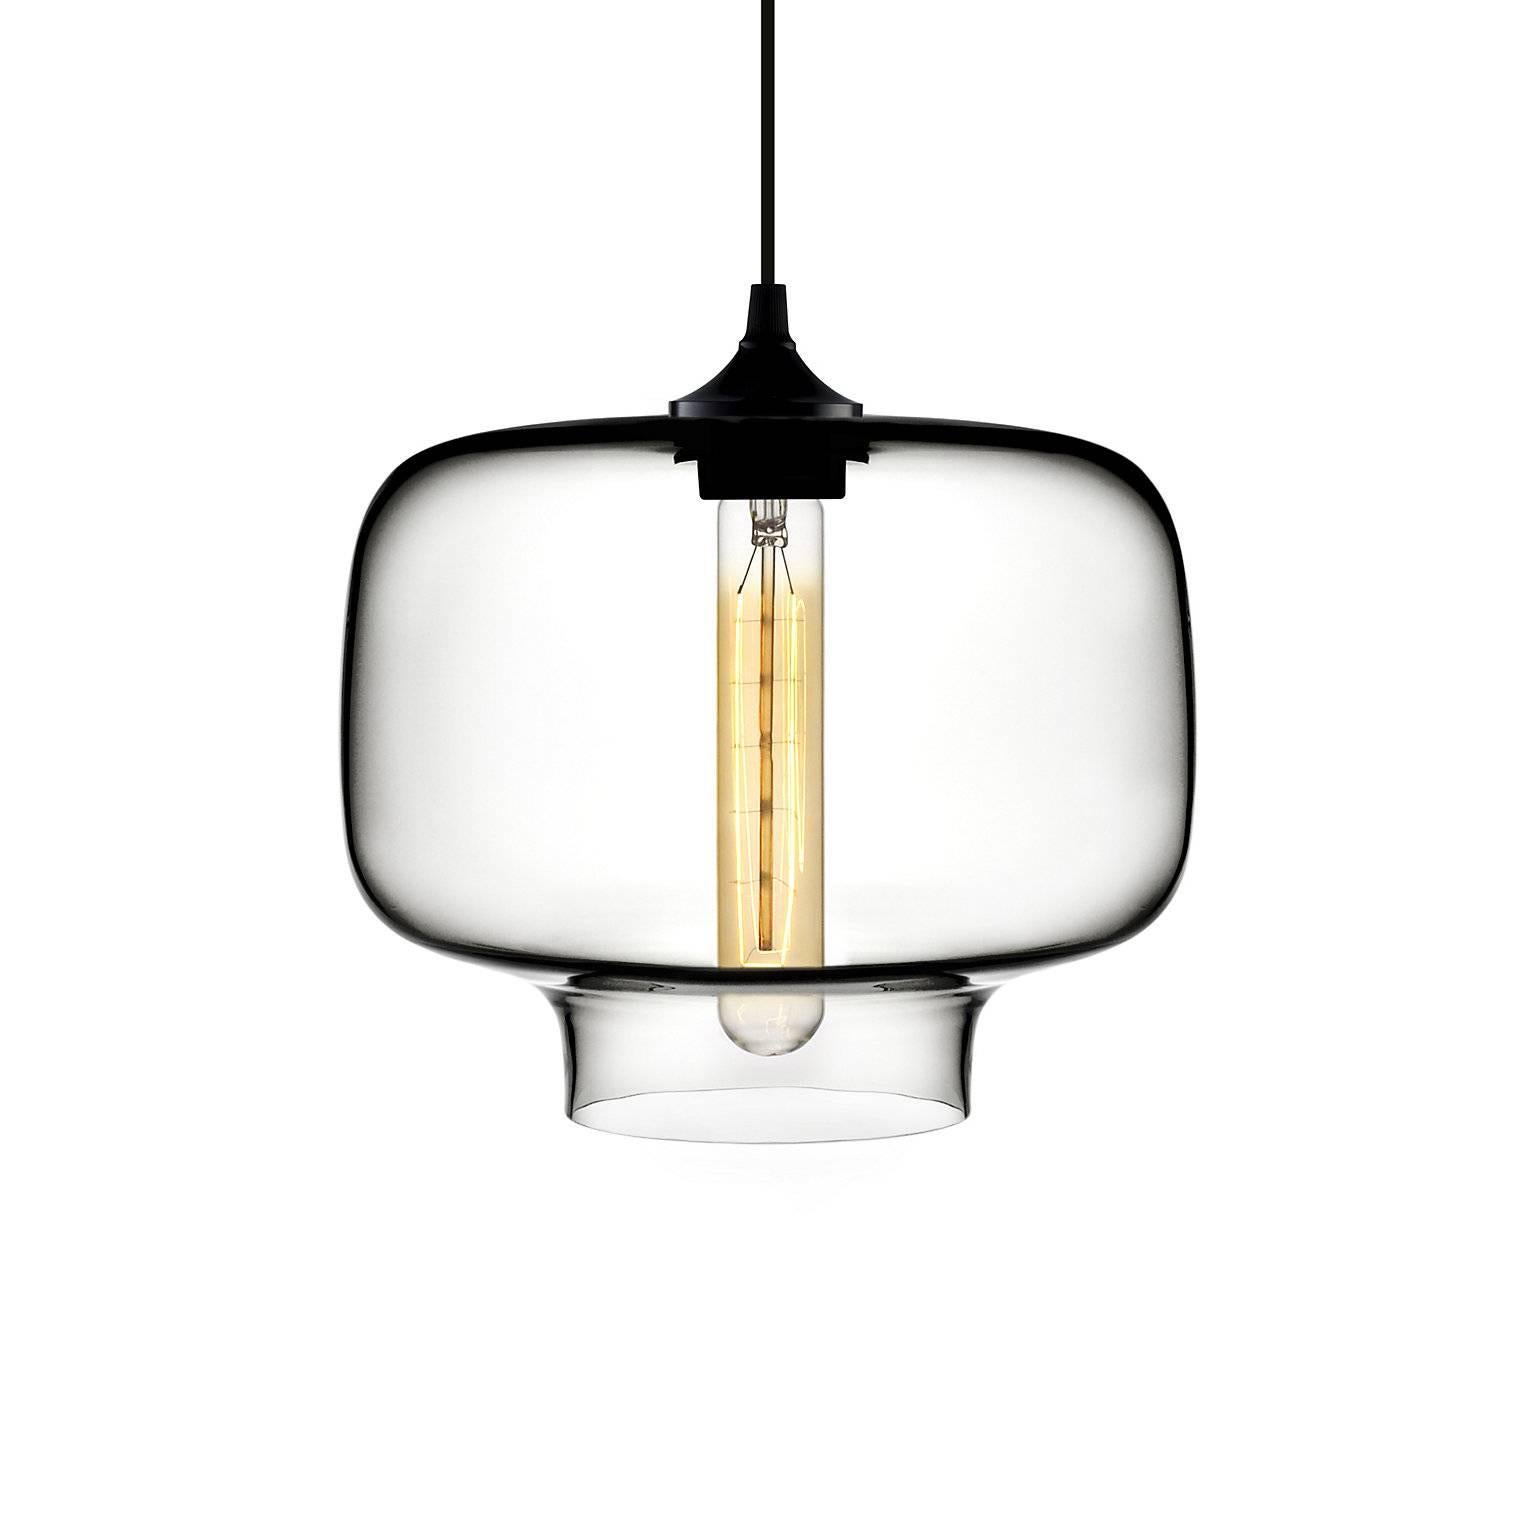 Oculo Smoke Handblown Modern Glass Pendant Light, Made in the USA In New Condition For Sale In Beacon, NY